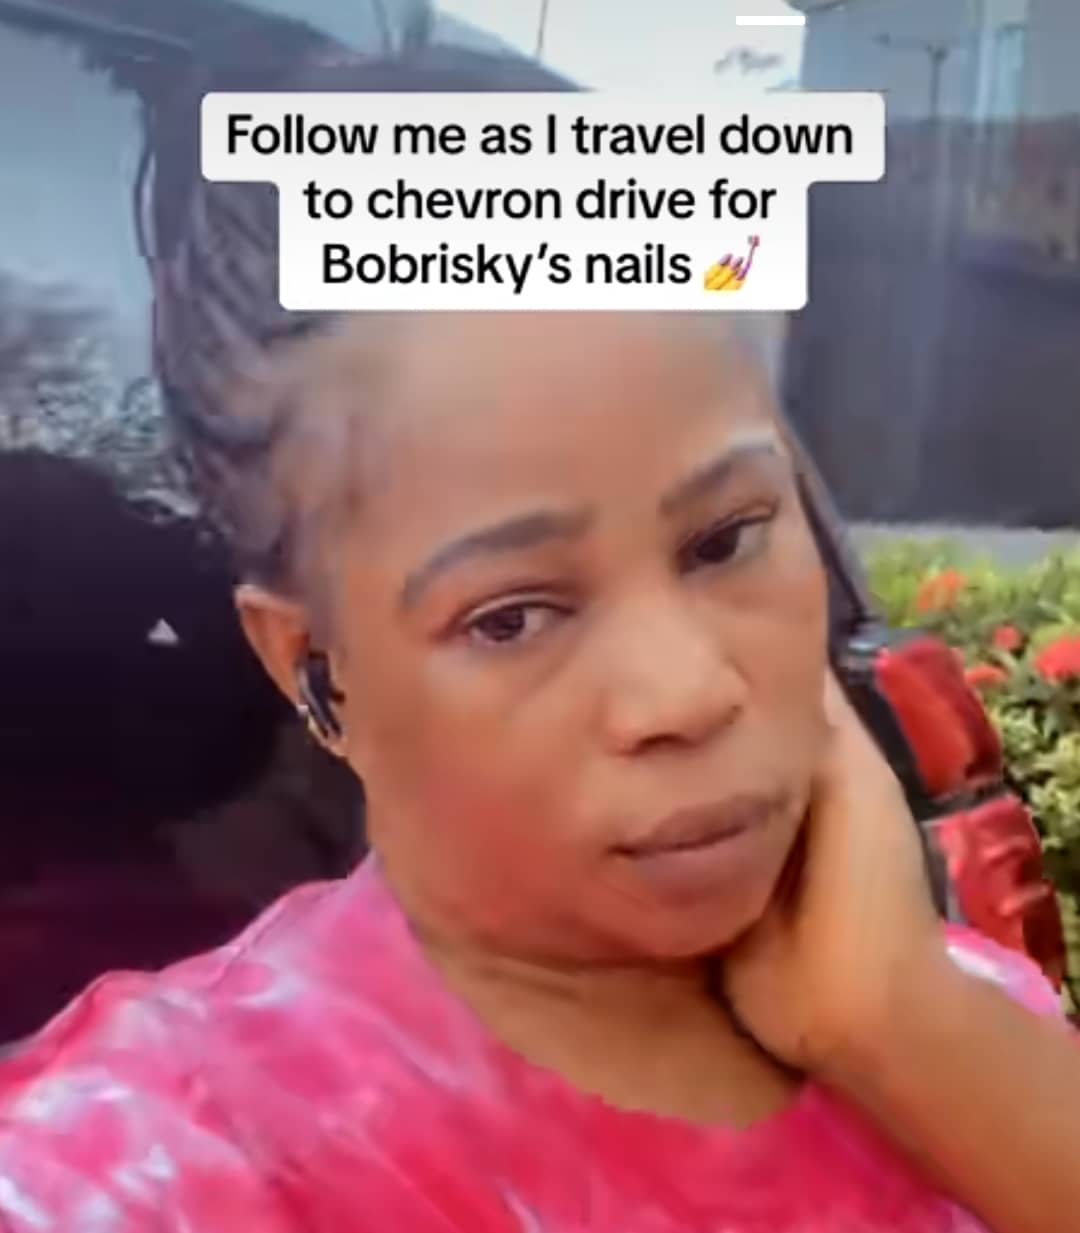 "Beautiful and friendly" - Drama online as lady drools over Bobrisky's beauty as she travels to his house to fix his nails